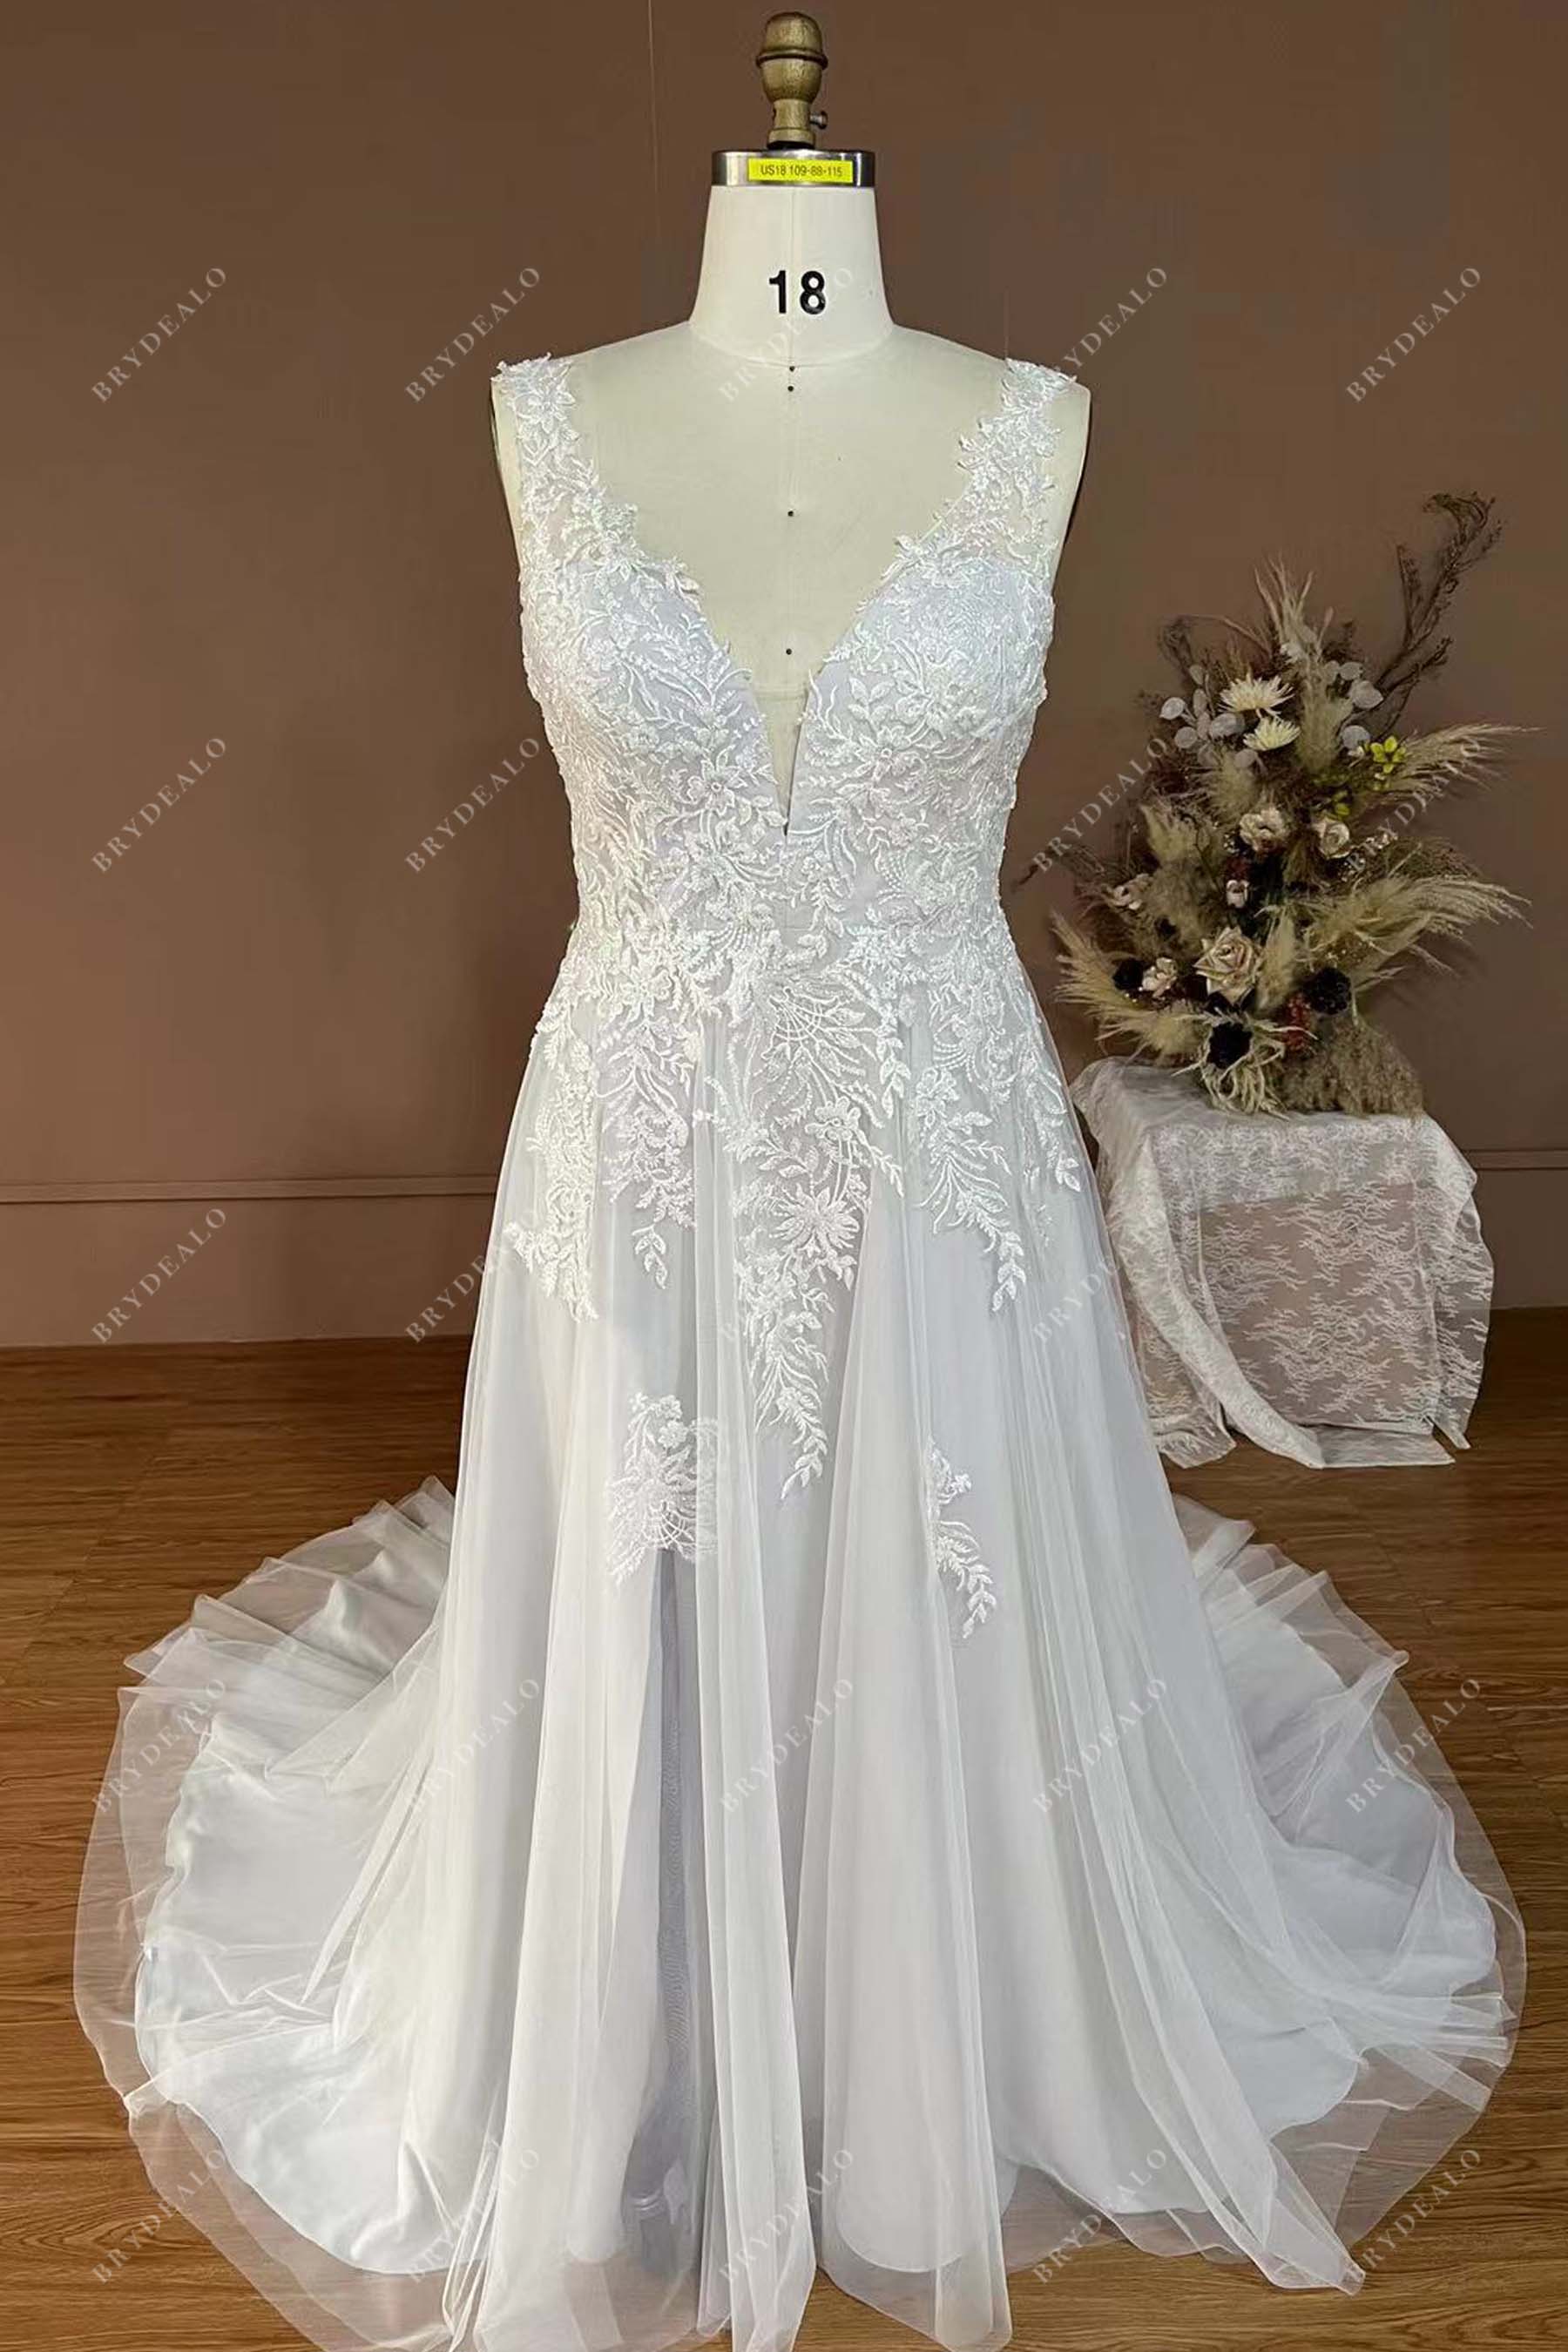 plunging v-neck lace overlaid silver A-line wedding dress